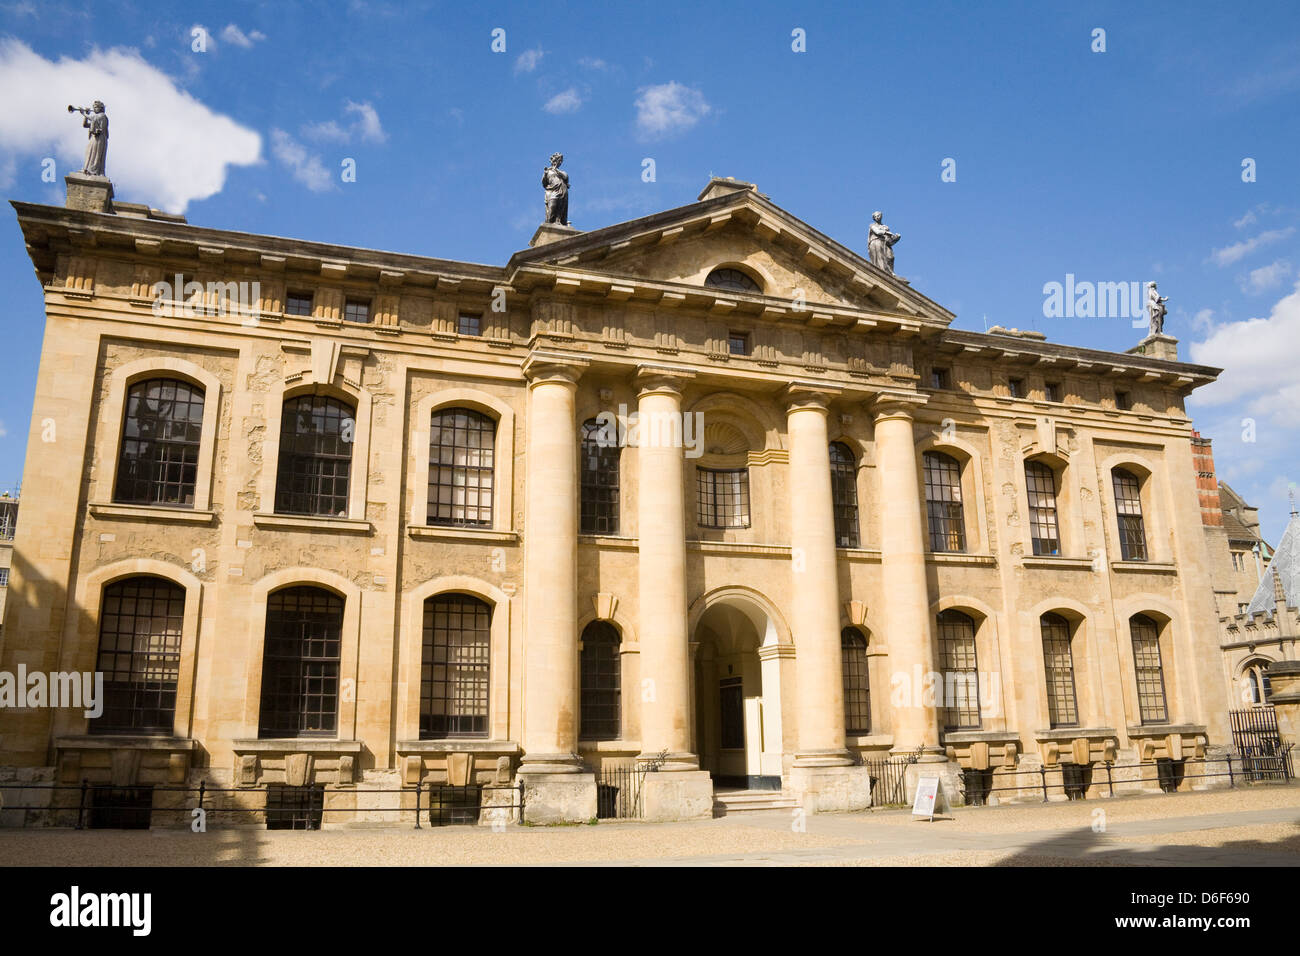 Oxford Oxfordshire Clarendon Grade 1 18thc listed building part of Bodleian Library Stock Photo